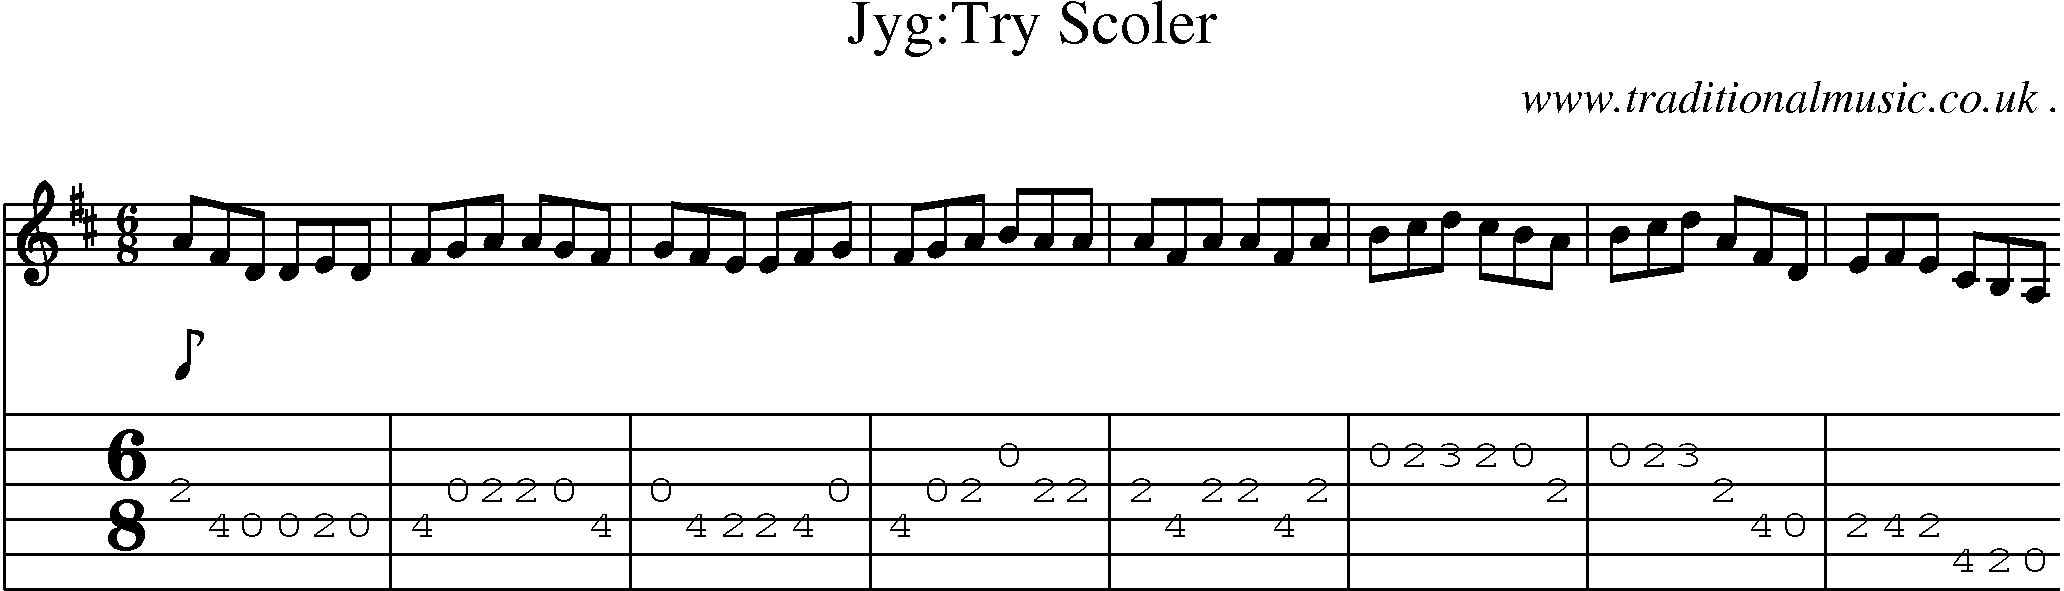 Sheet-Music and Guitar Tabs for Jygtry Scoler